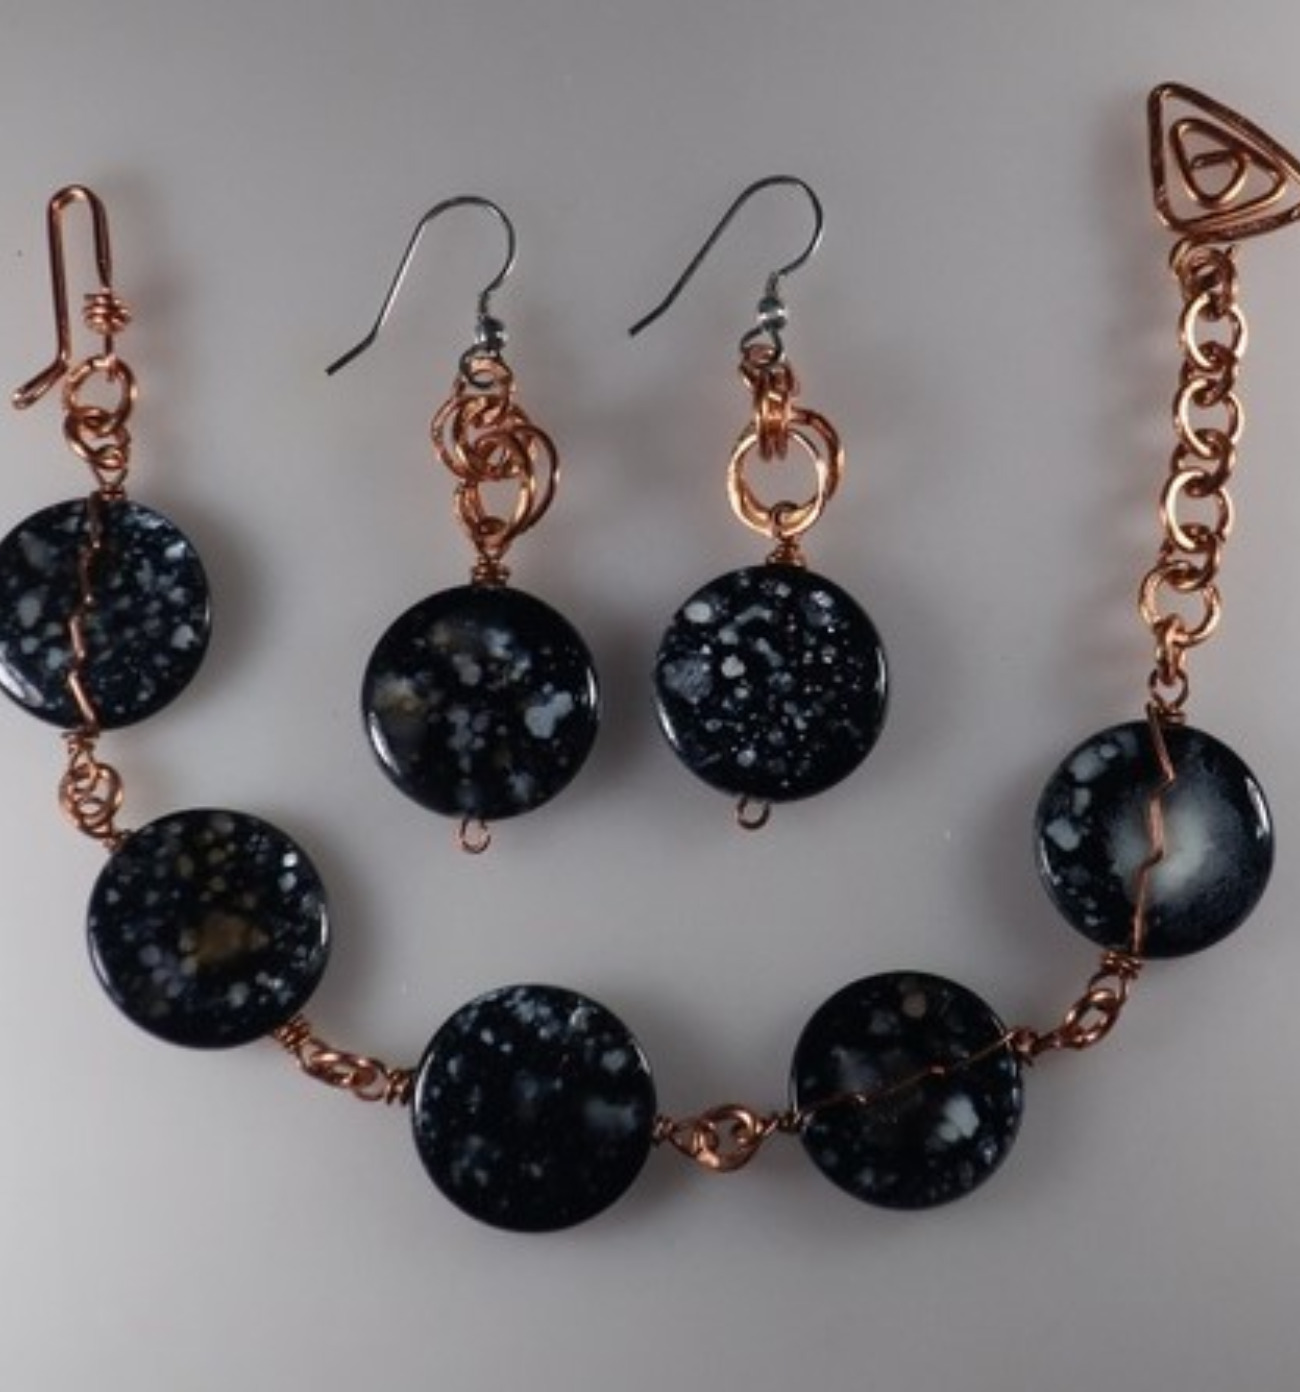 (222  - BCT) - Description: Handcrafted Bracelet, Copper Wire, Shell Beads, Hook Closure:  Earrings: Sterling Silver Earwire - Dimension: Bracelet Adjustable up to 8 ' L (Inches) - Earring 2" L